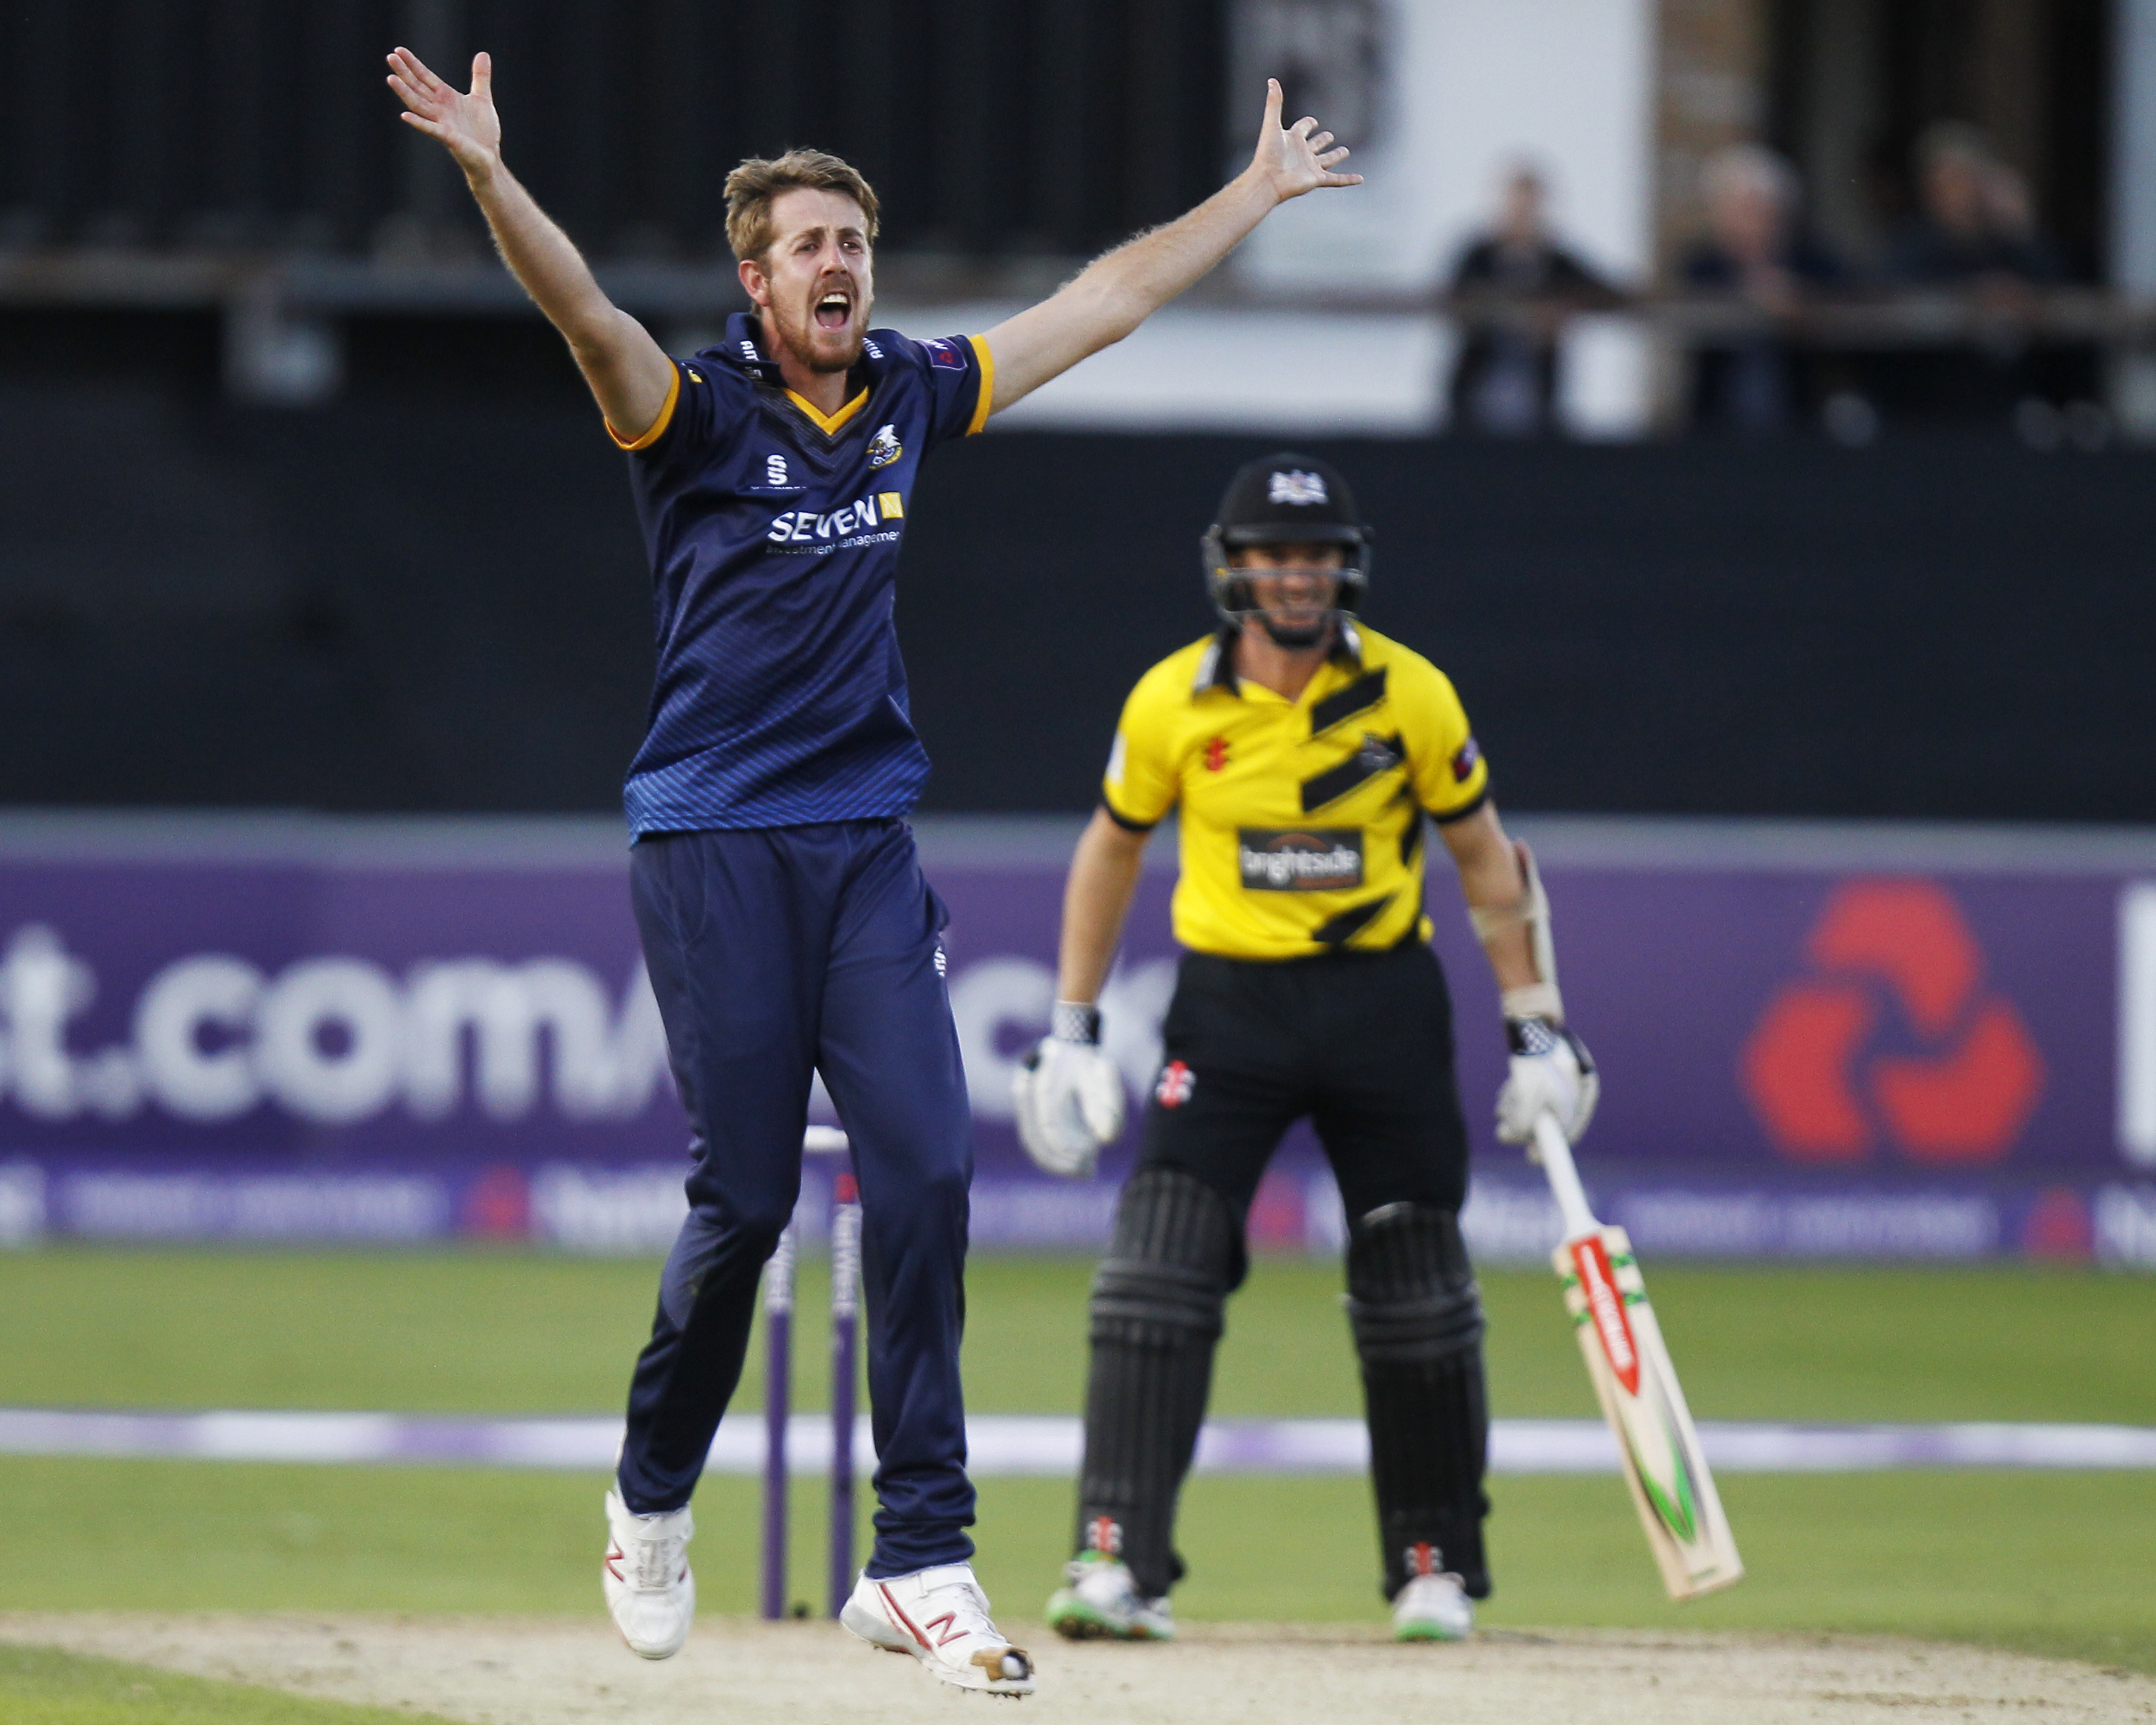 Matt Quinn appeals for a wicket during the T20 match against Gloucestershire in 2016.